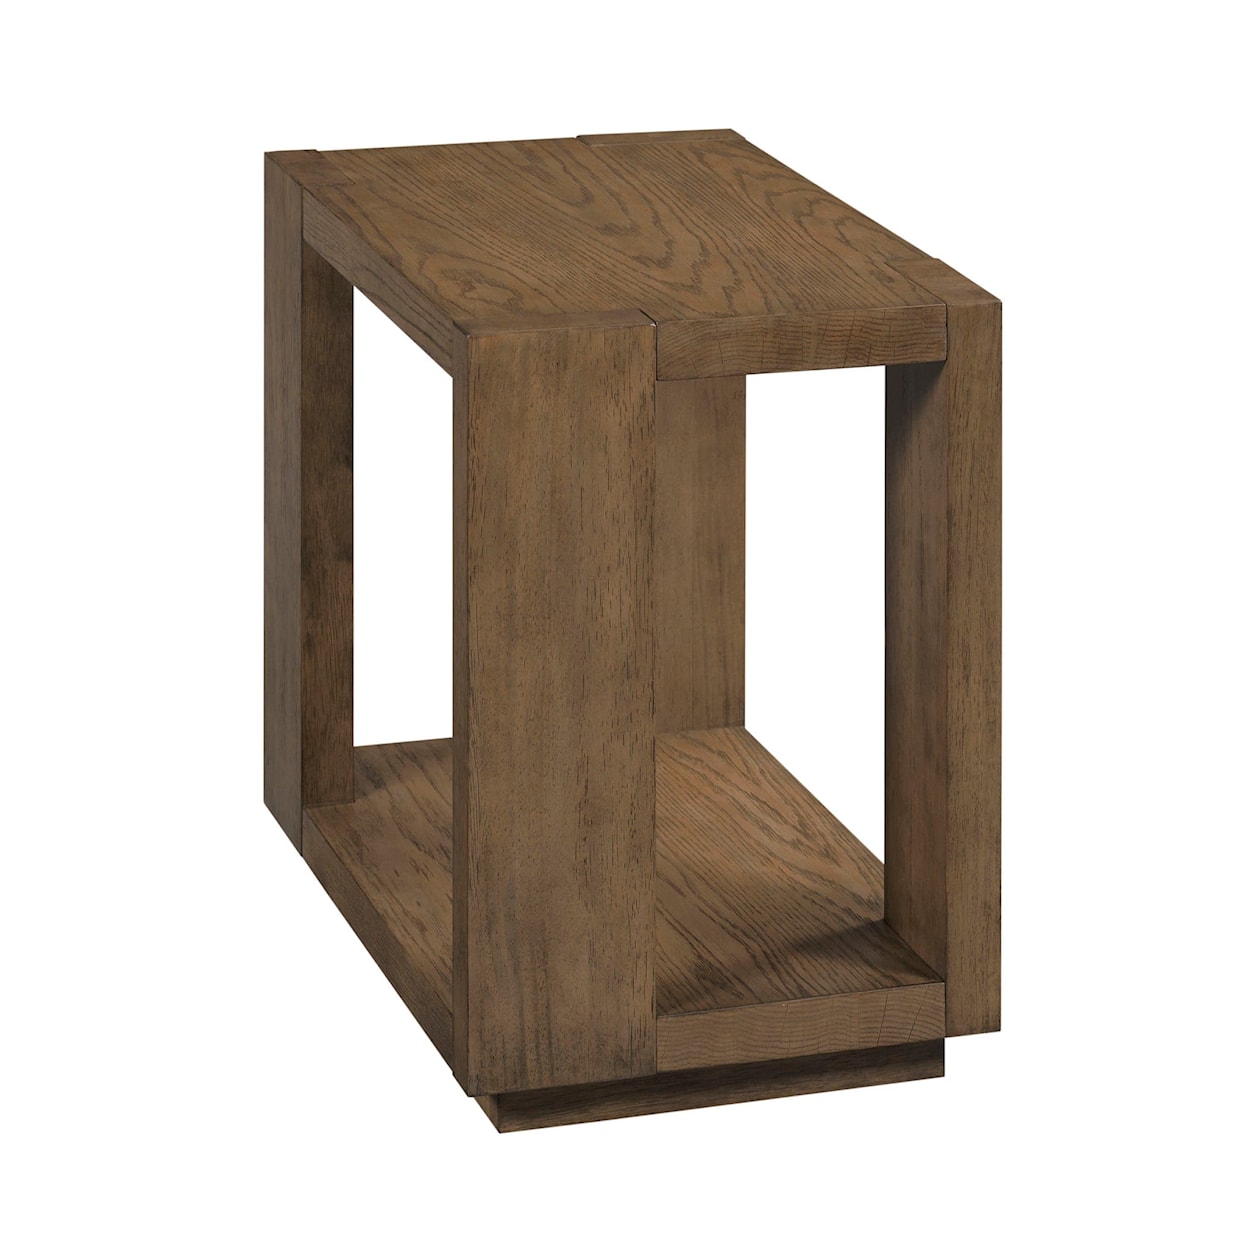 Hammary Colson Chairside Table